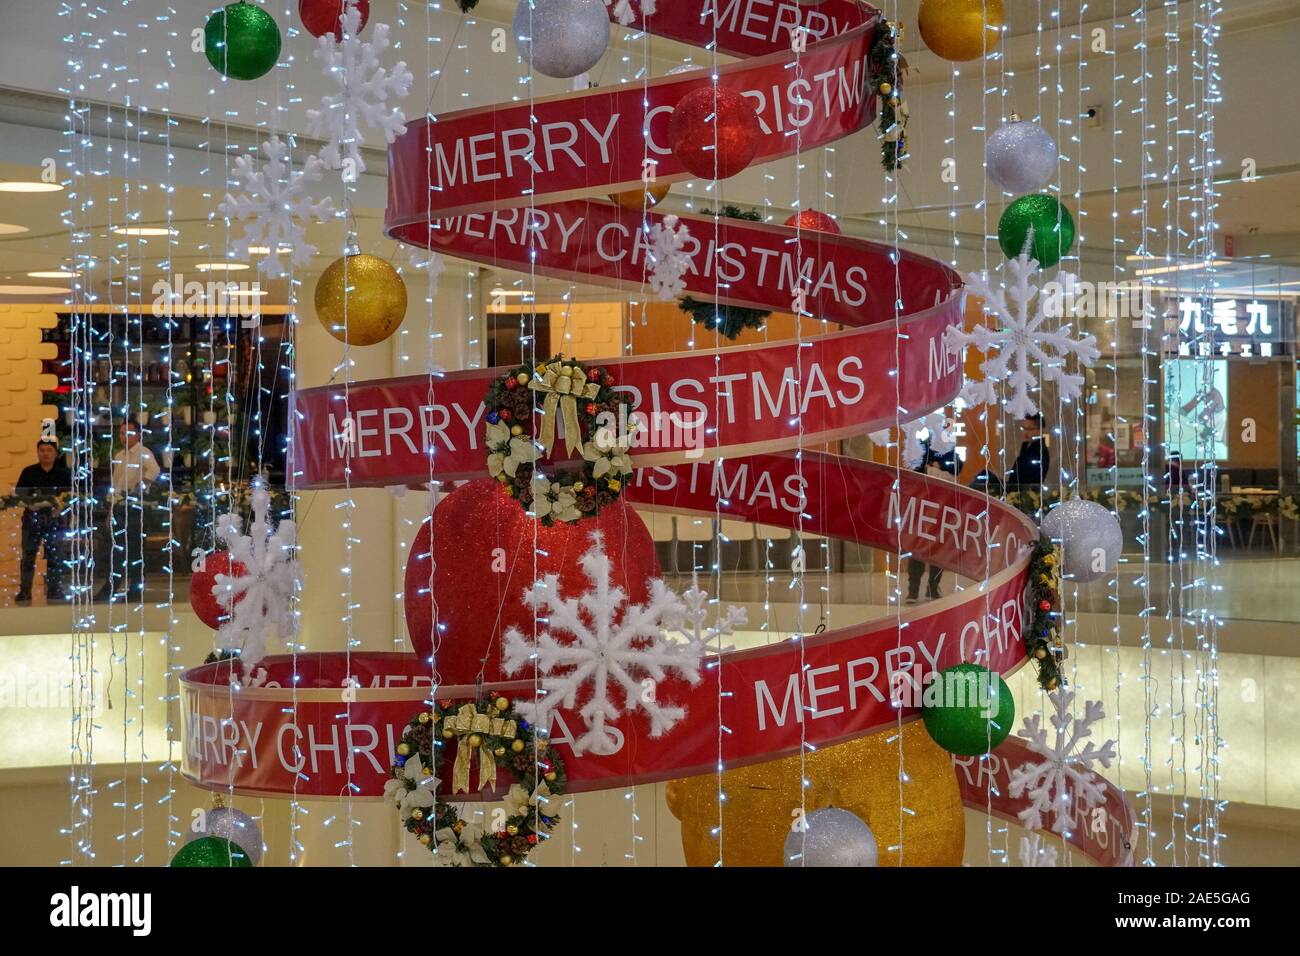 Top 99 christmas decorations mall Browse festive displays and find  inspiration